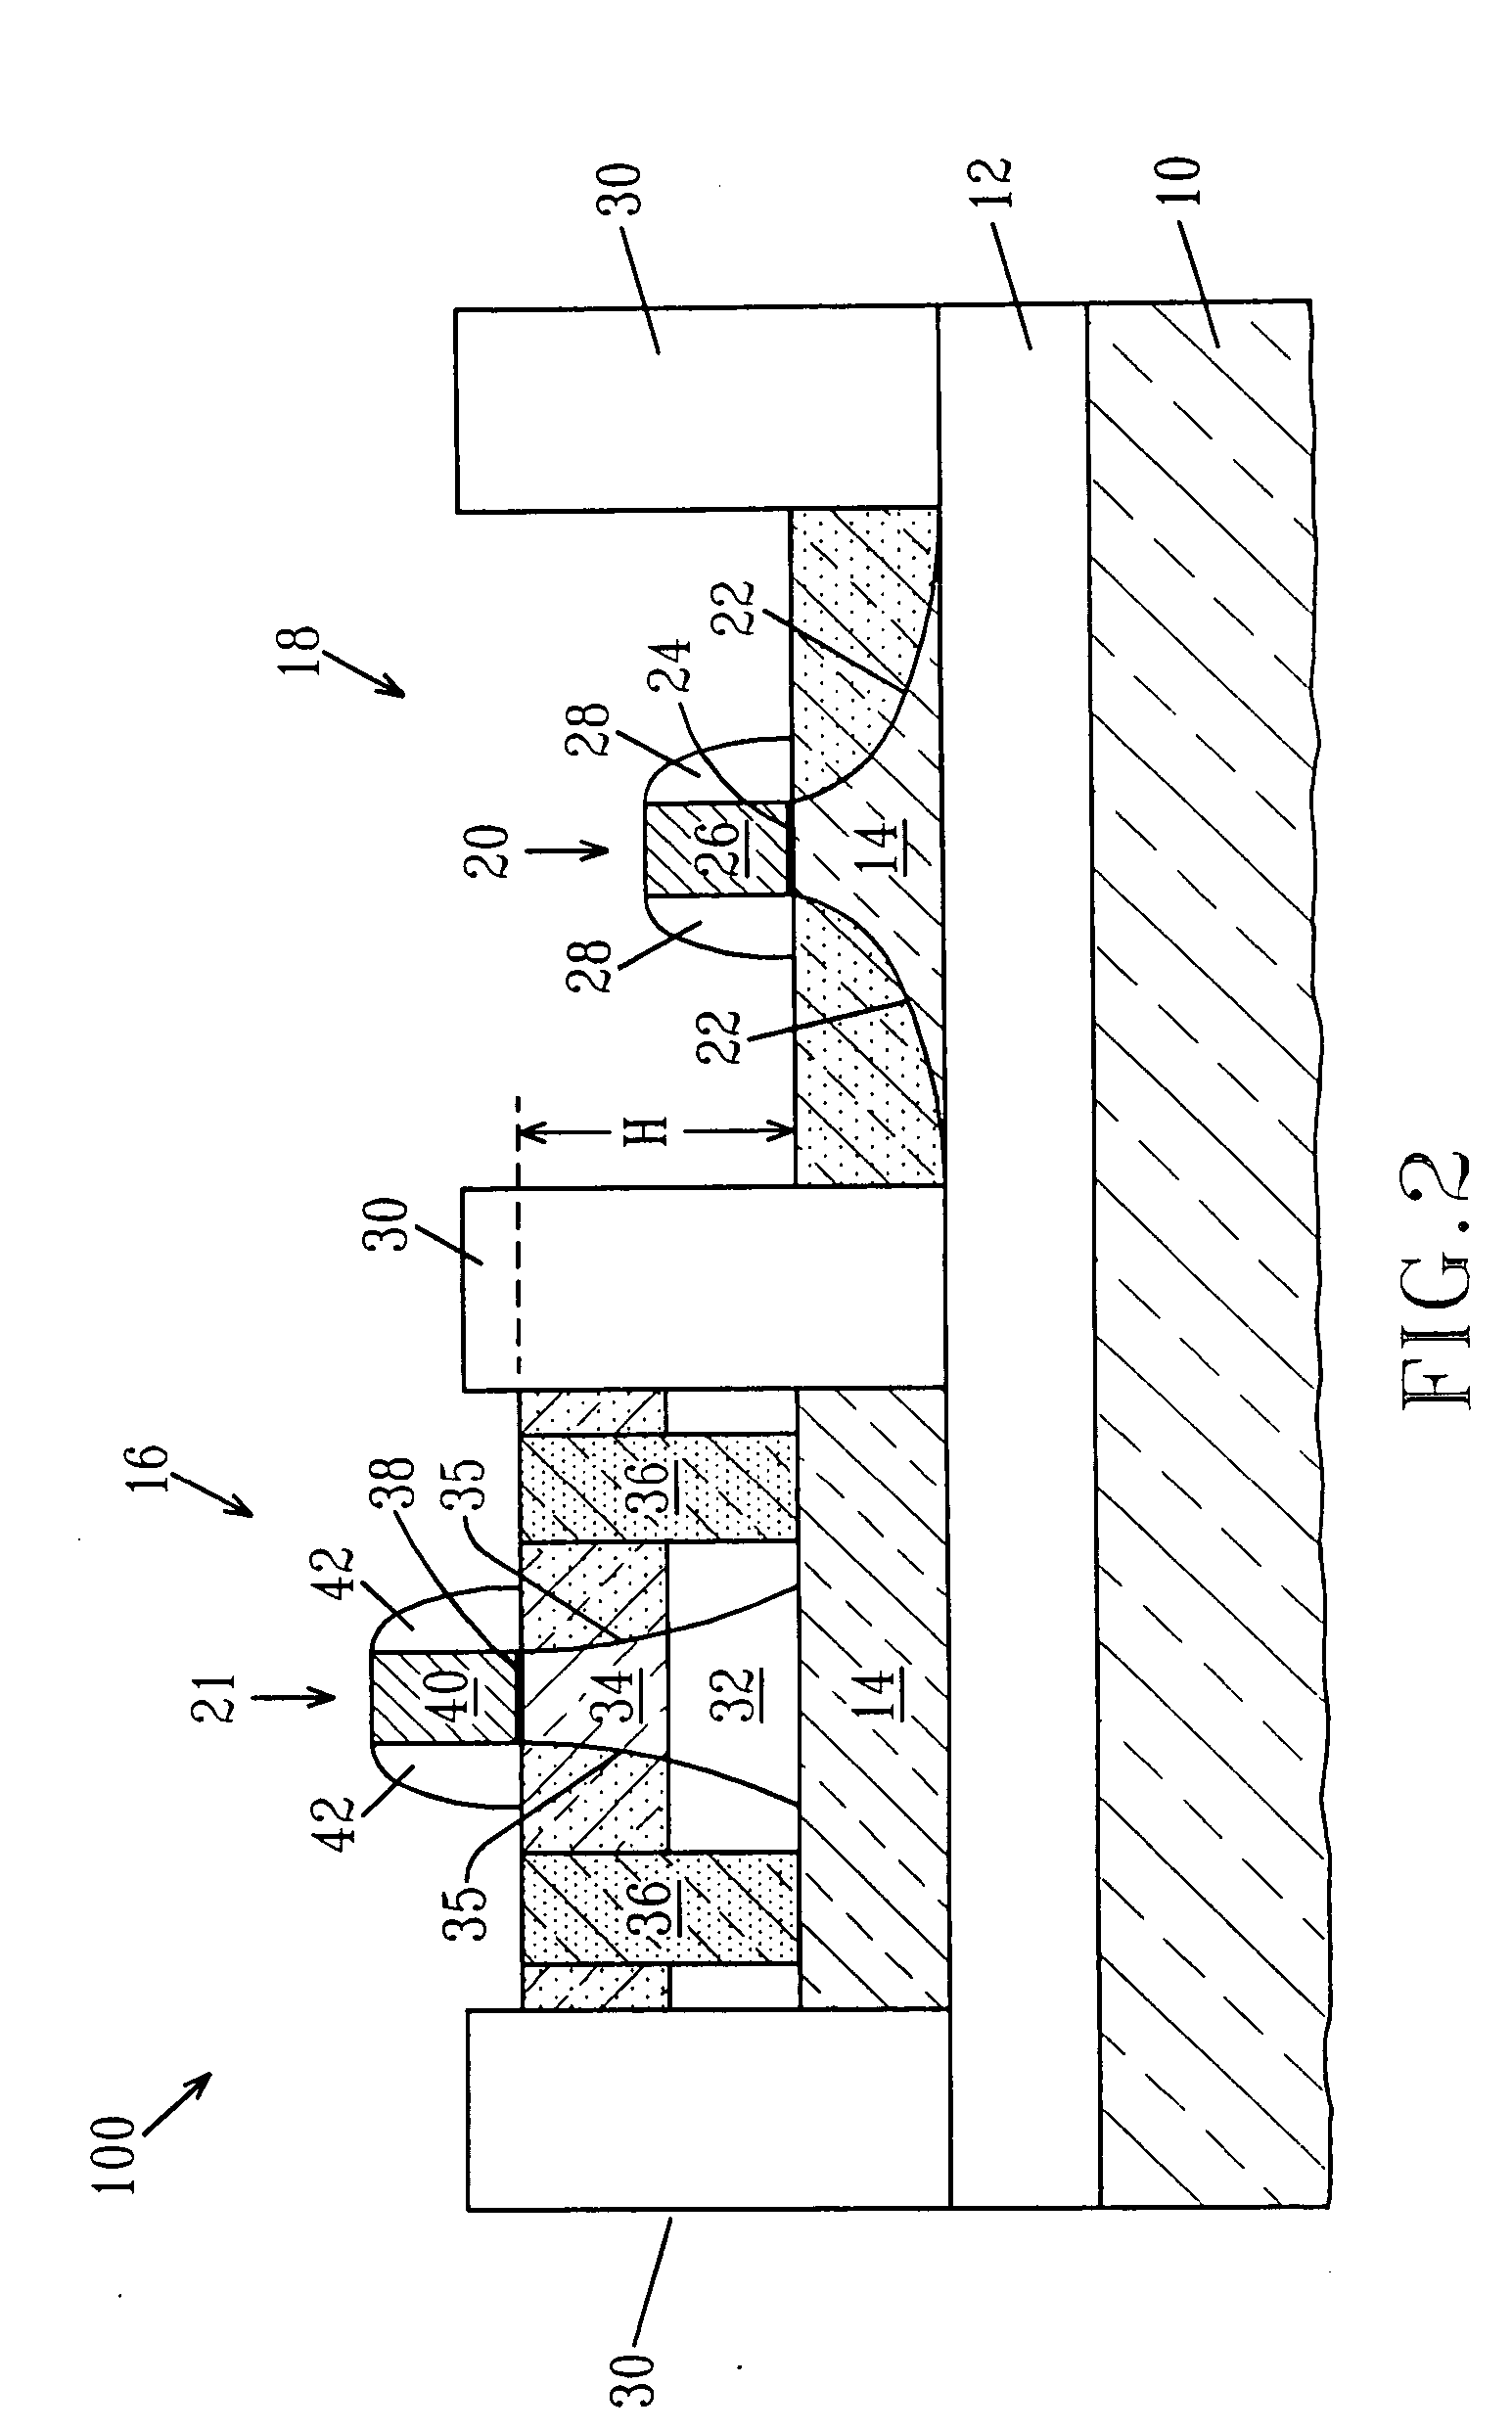 Double silicon-on-insulator (SOI) metal oxide semiconductor field effect transistor (MOSFET) structures